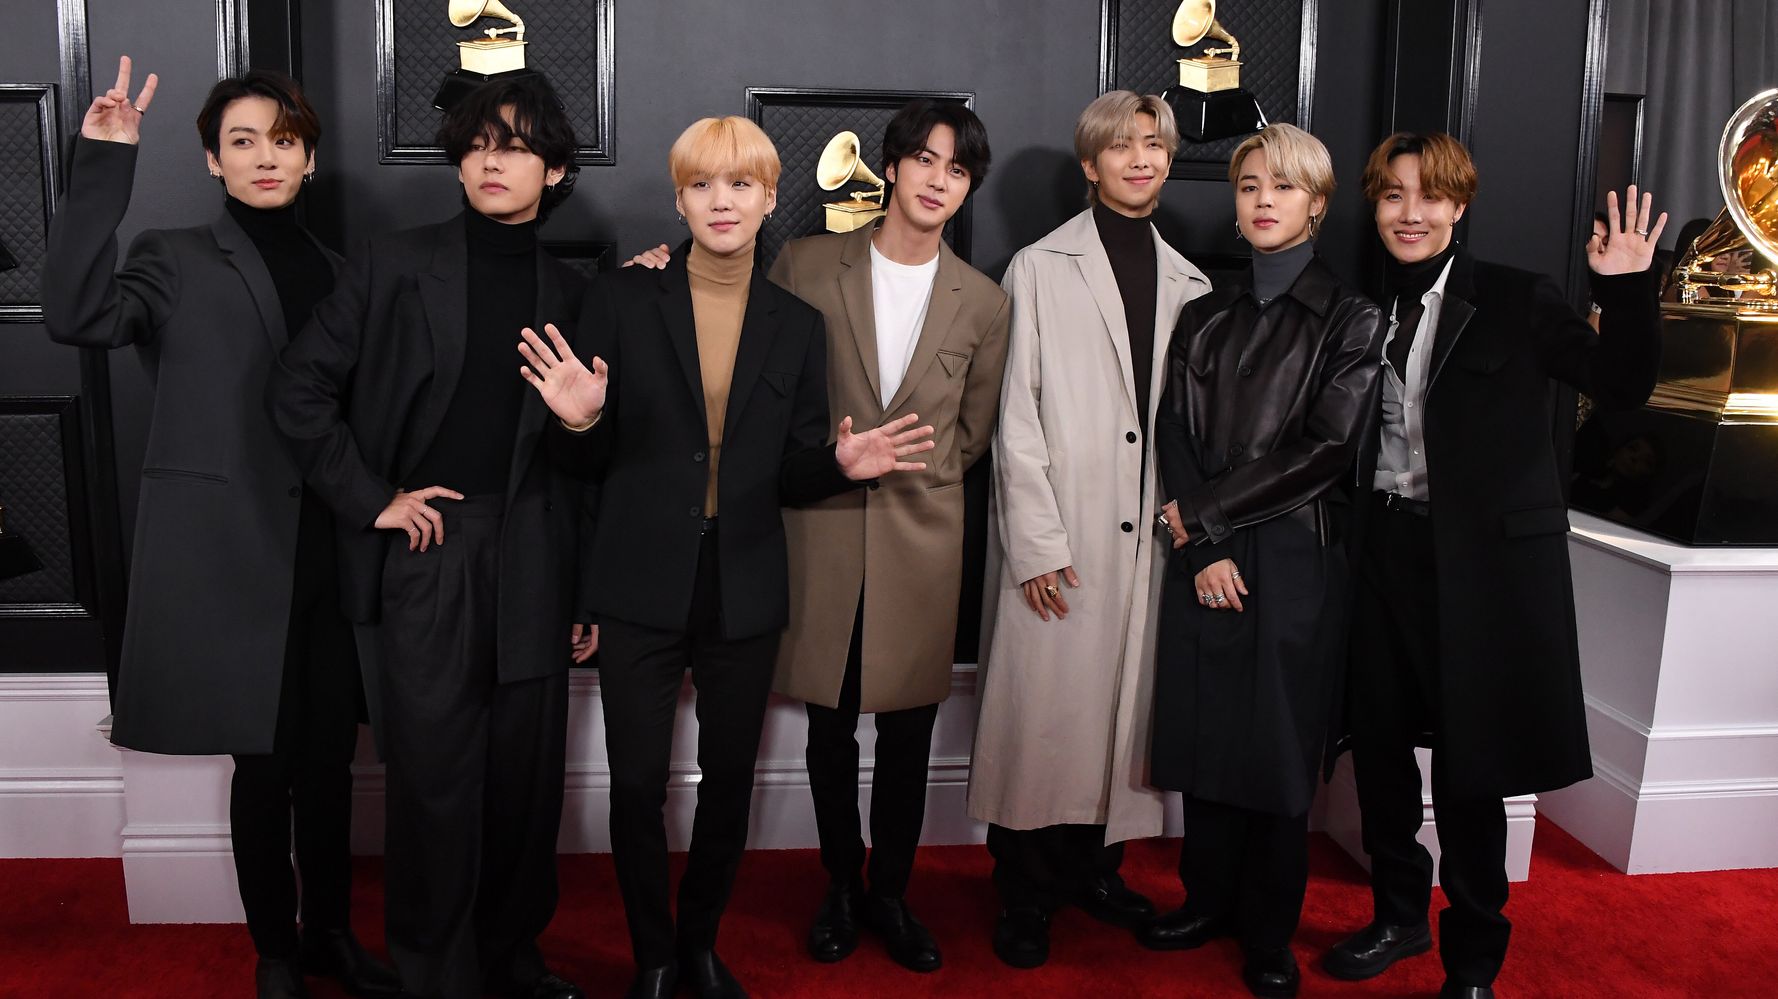 You Can Now Own BTS' Grammys 'Dynamite' Performance Suits